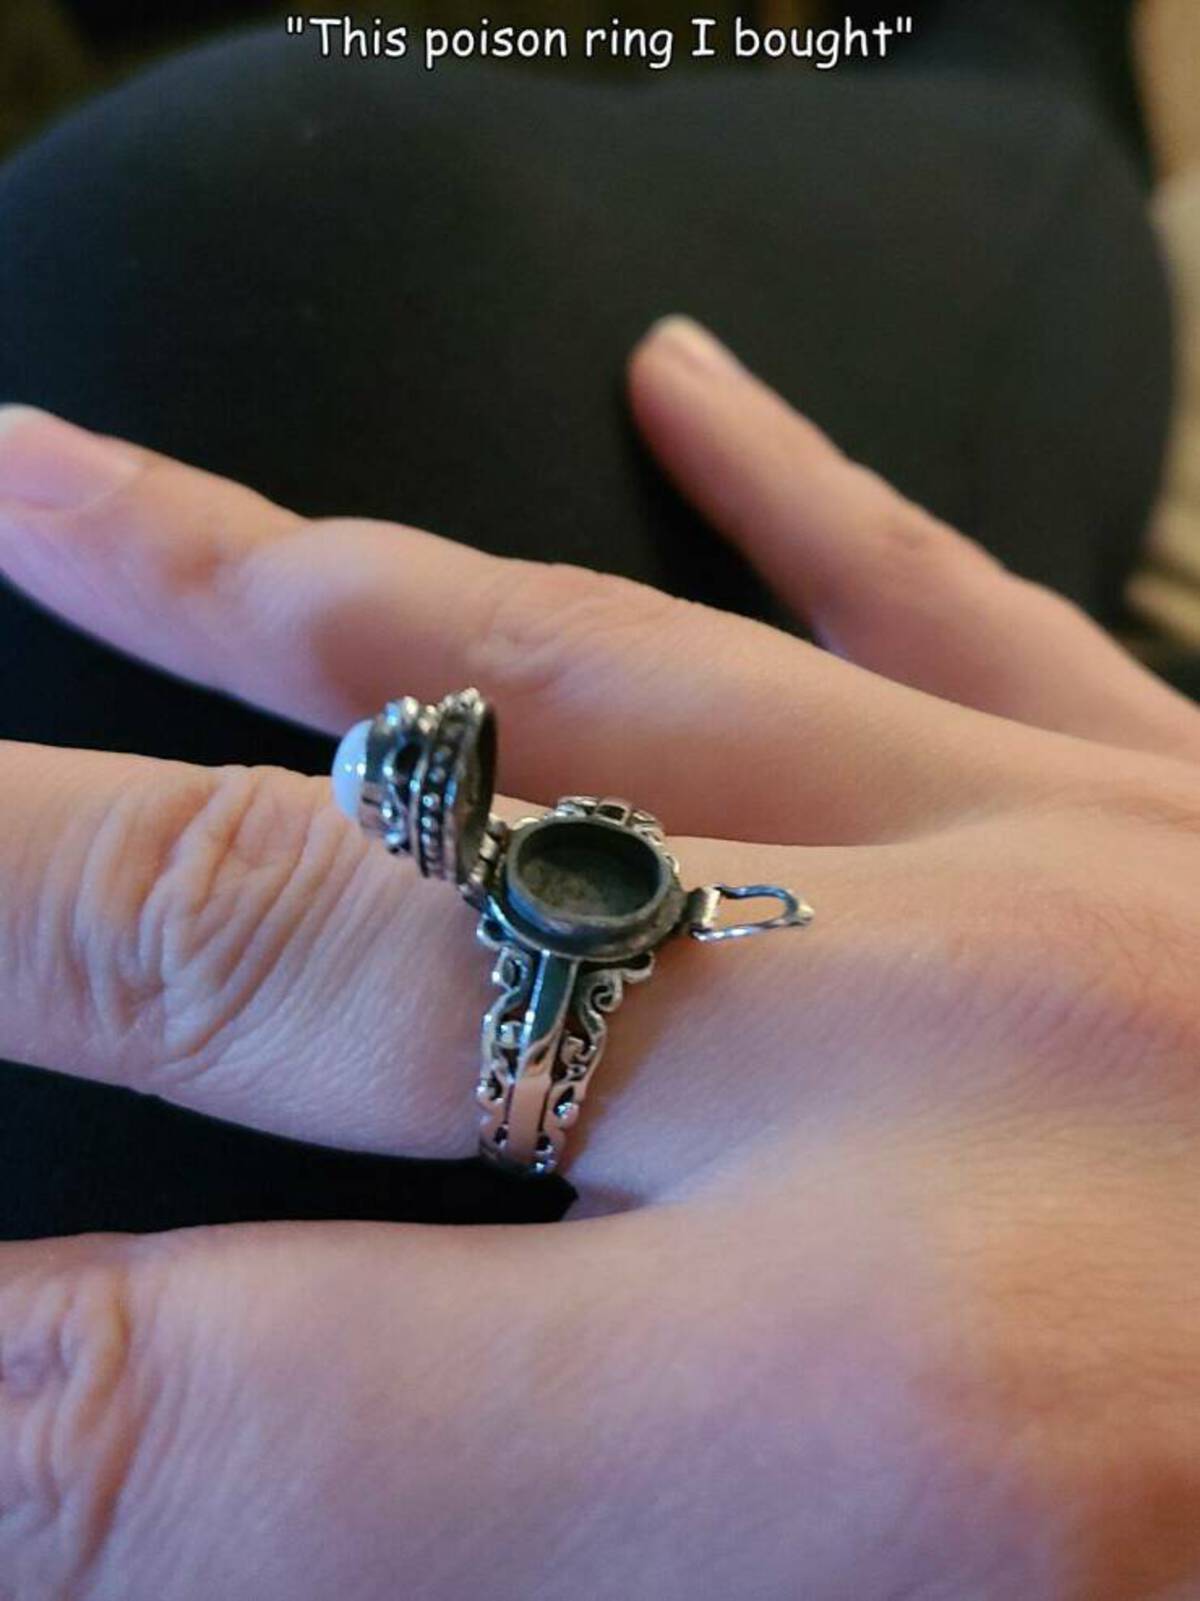 pre-engagement ring - "This poison ring I bought"